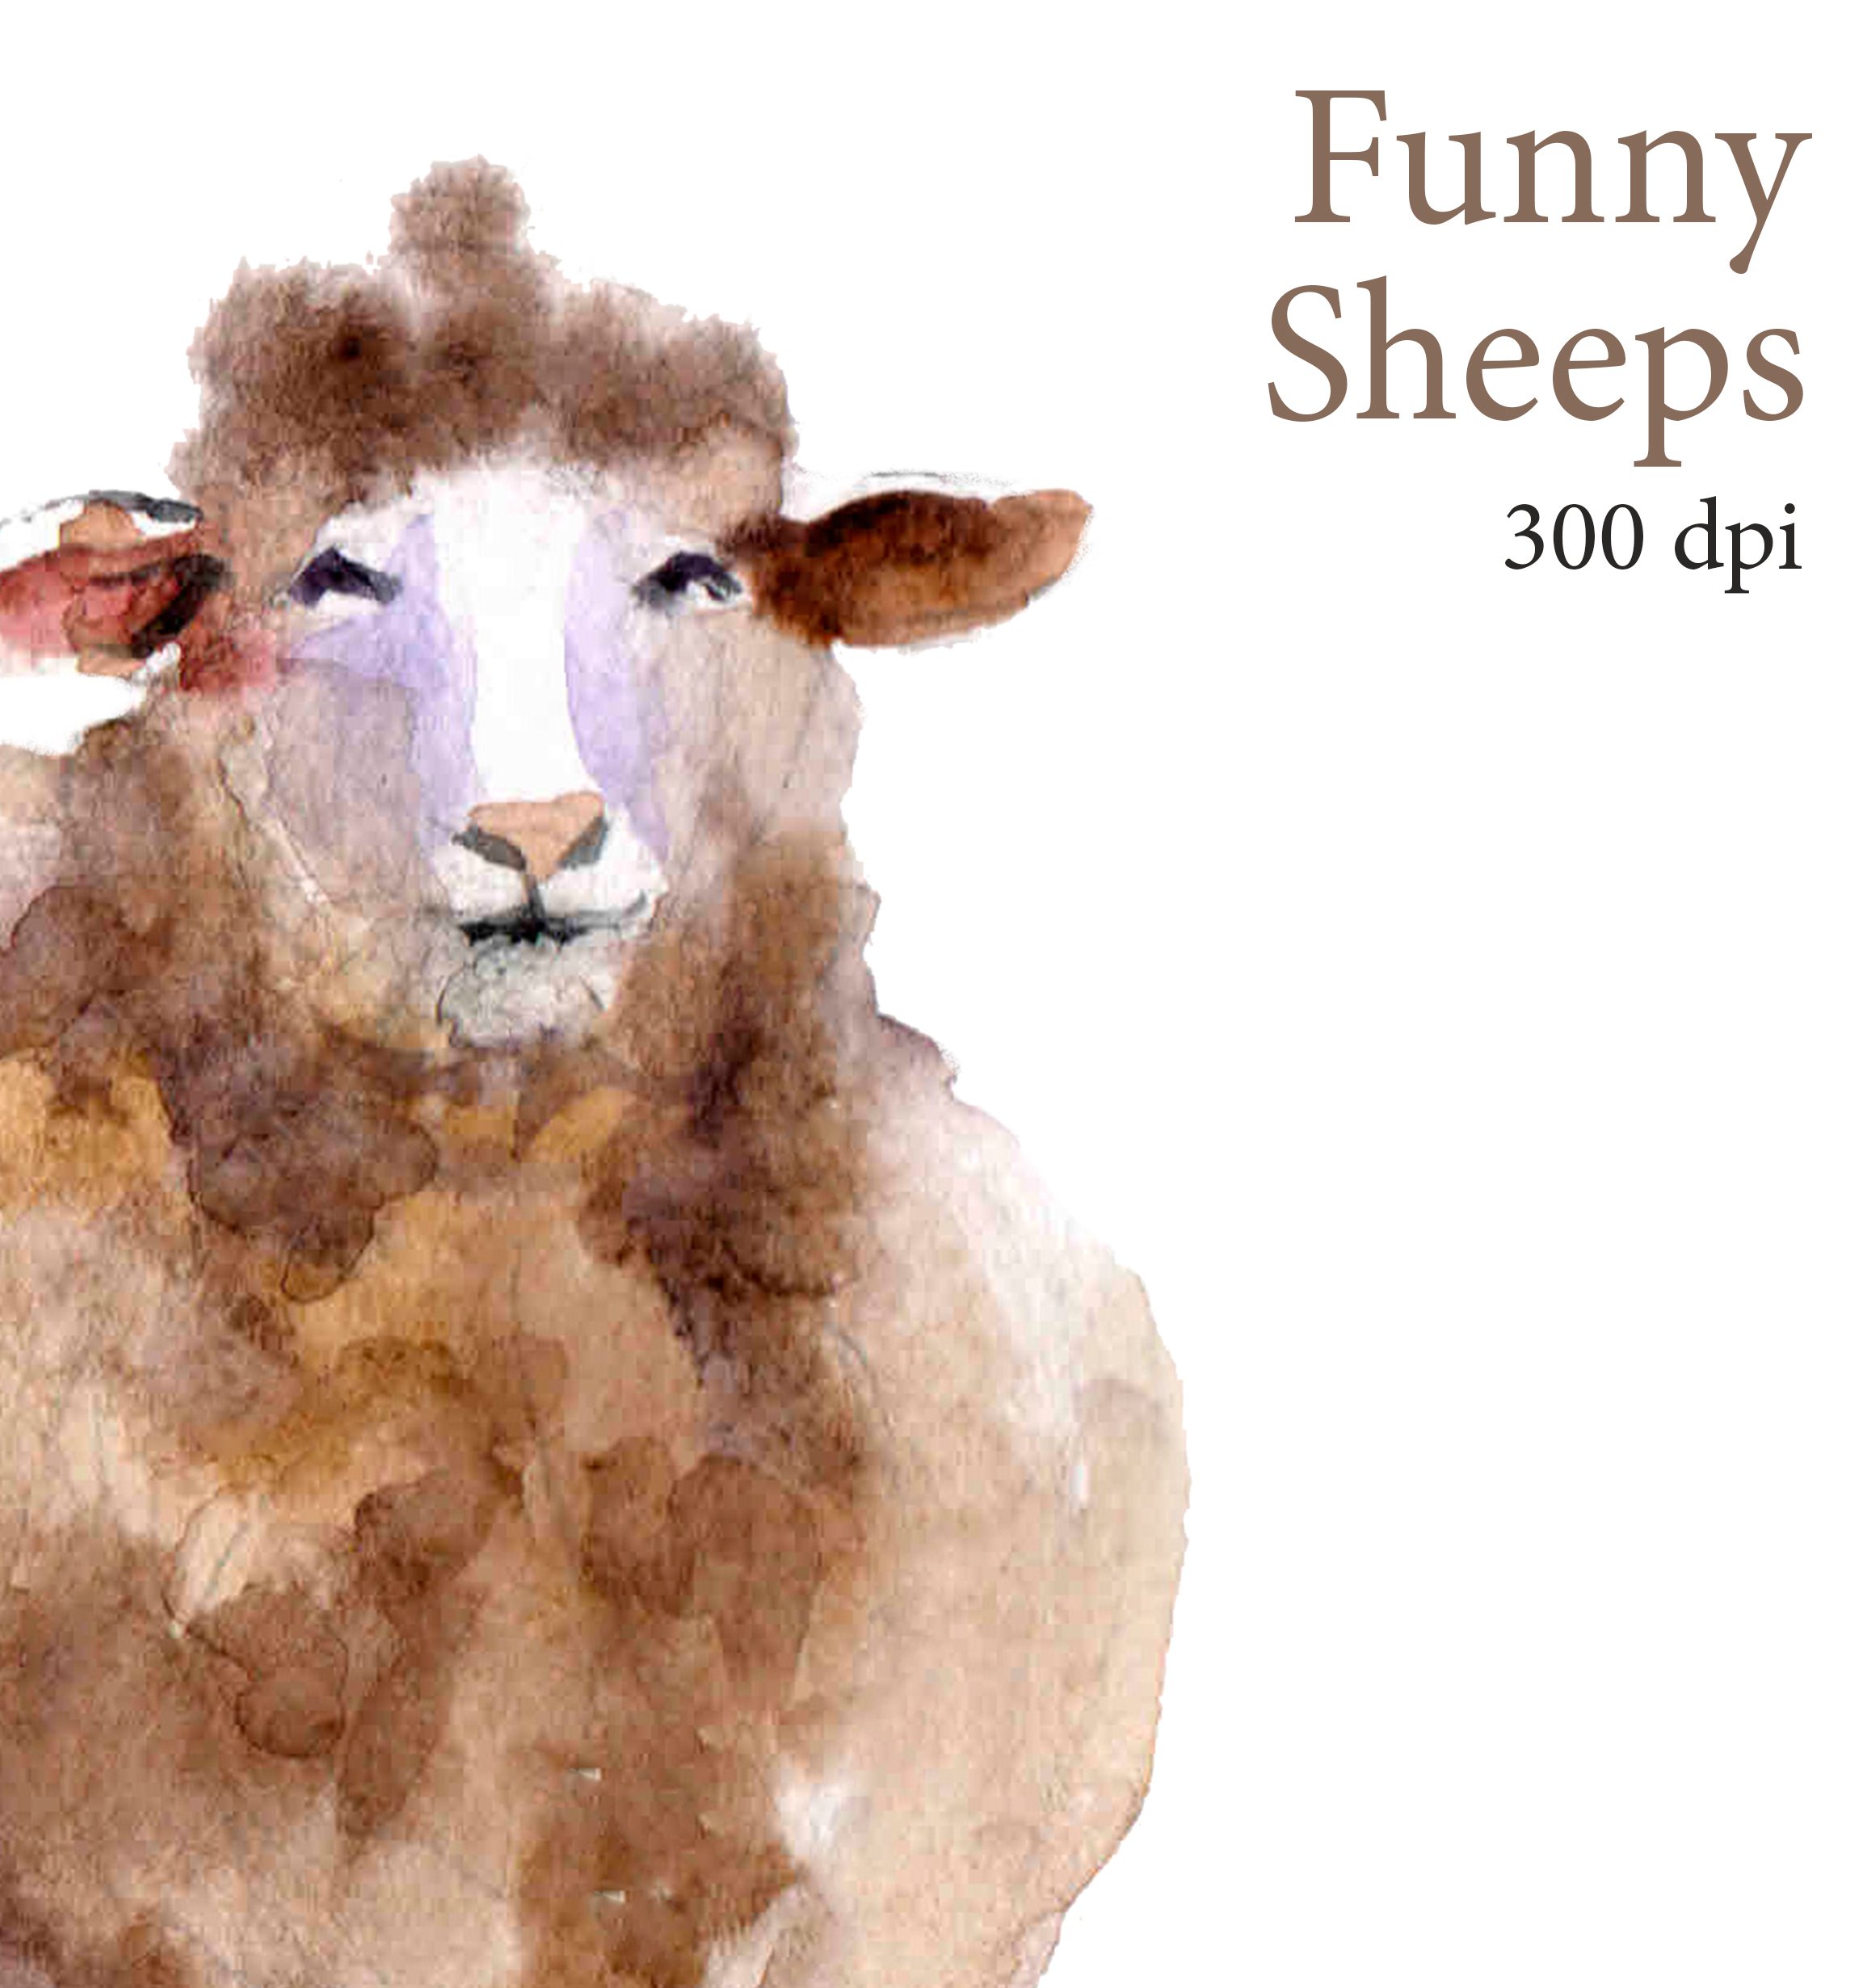 Watercolor Clipart. Sheep Clipart.